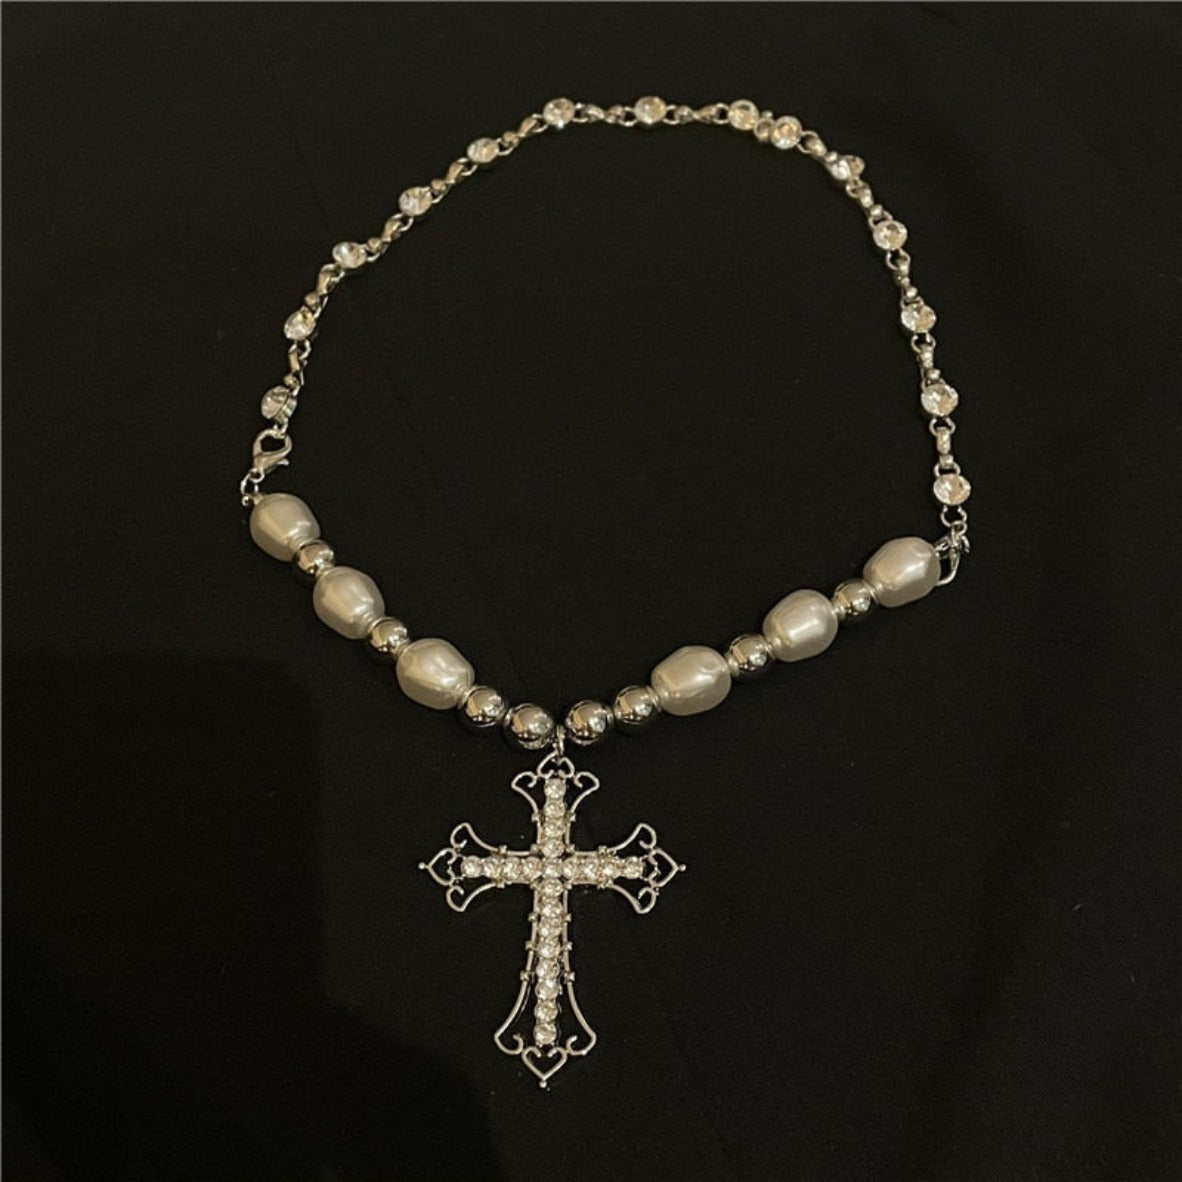 Vintage Style Cross Goth Necklace - Festigal